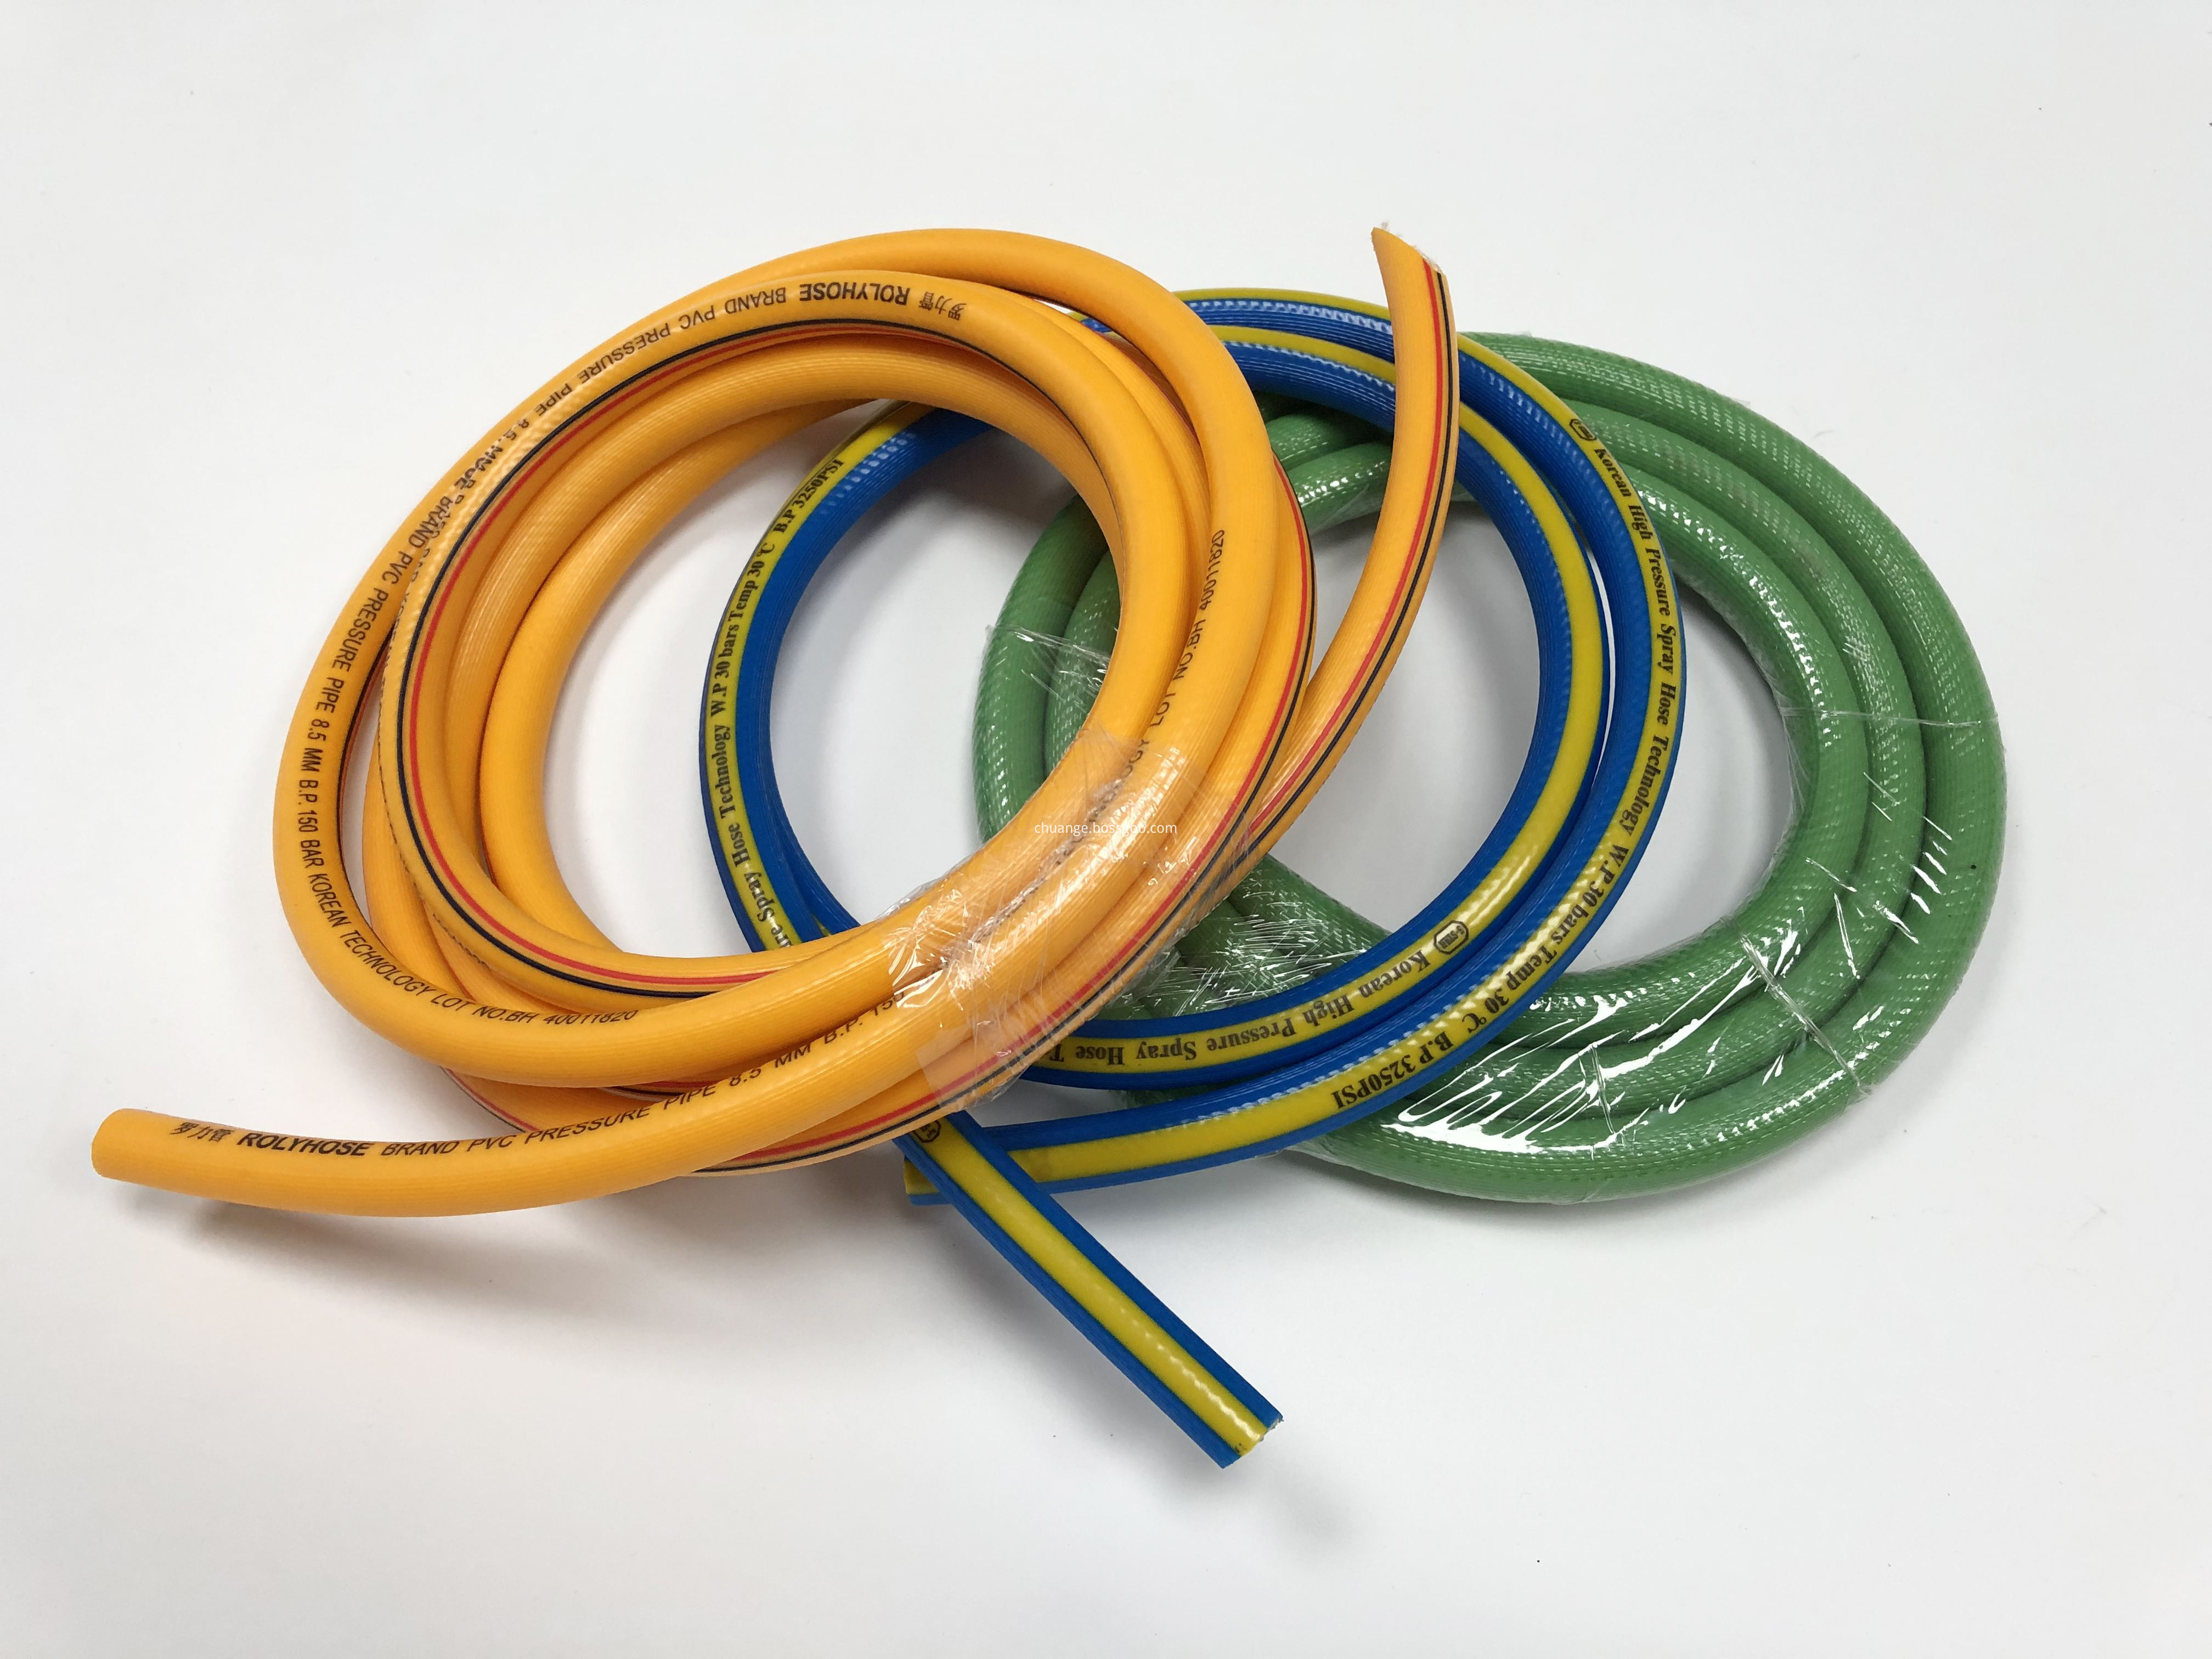 What's the difference between rigid and flexible PVC cable - Henan